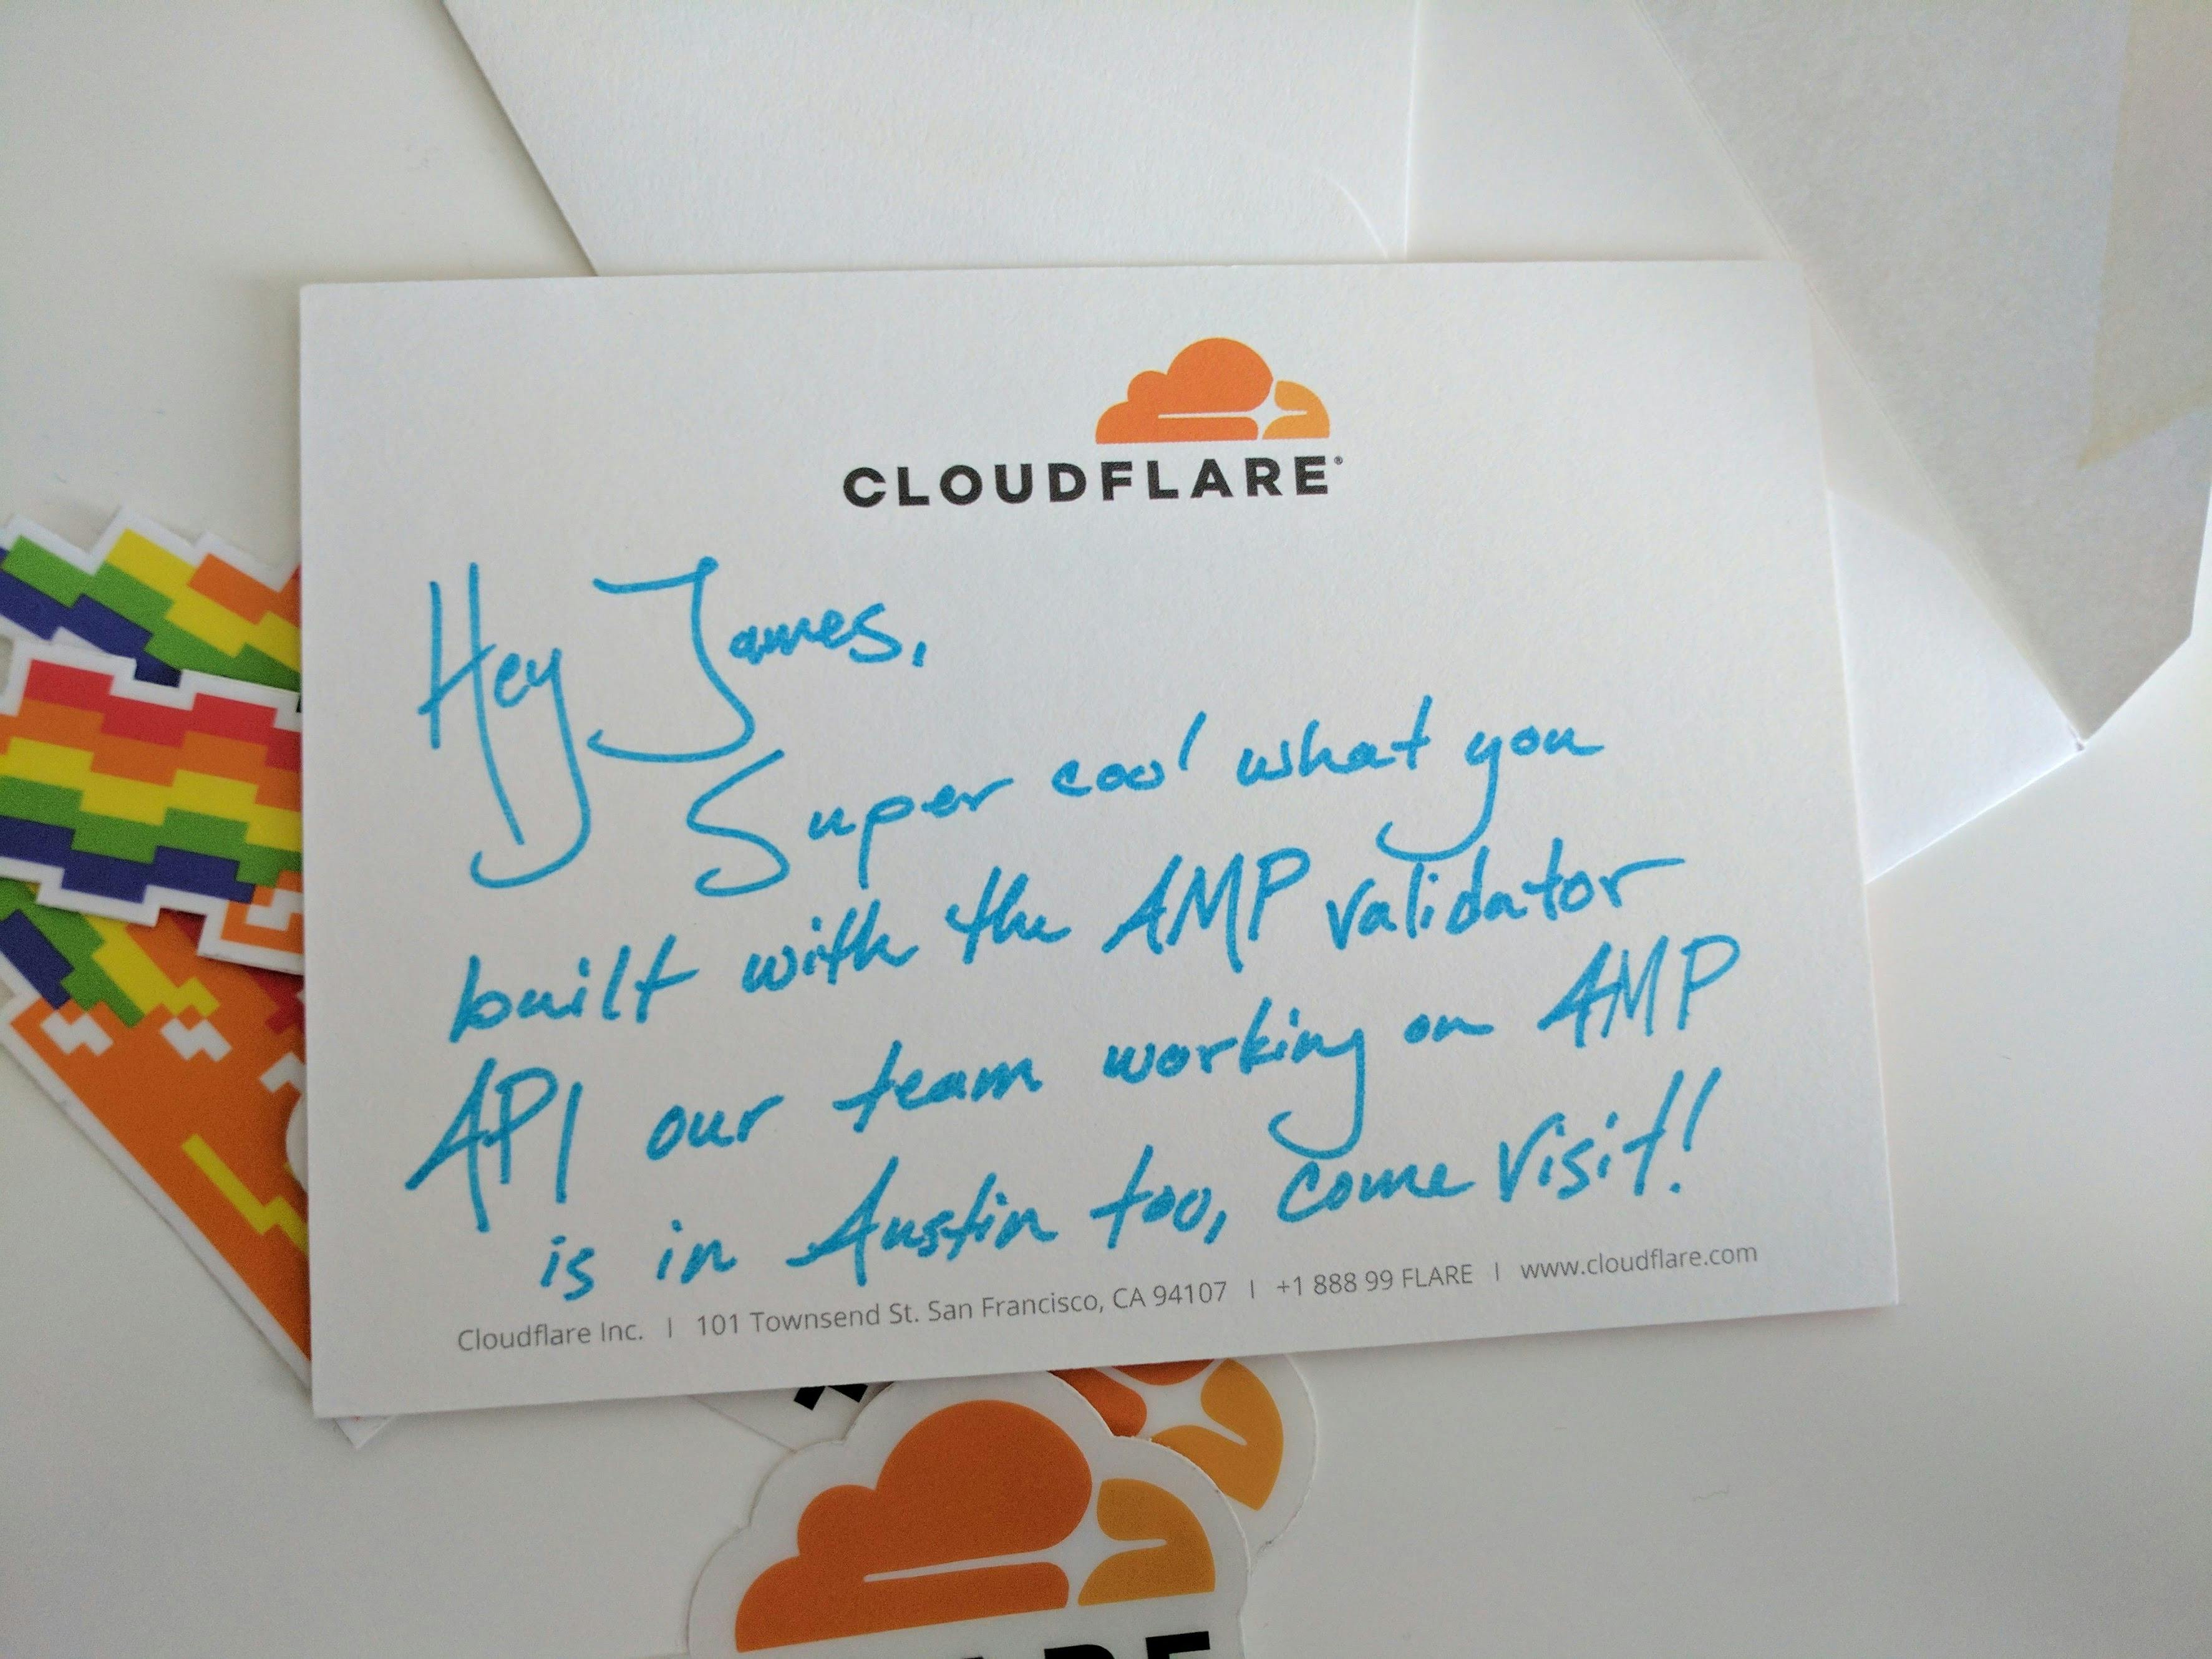 Cloudflare swag